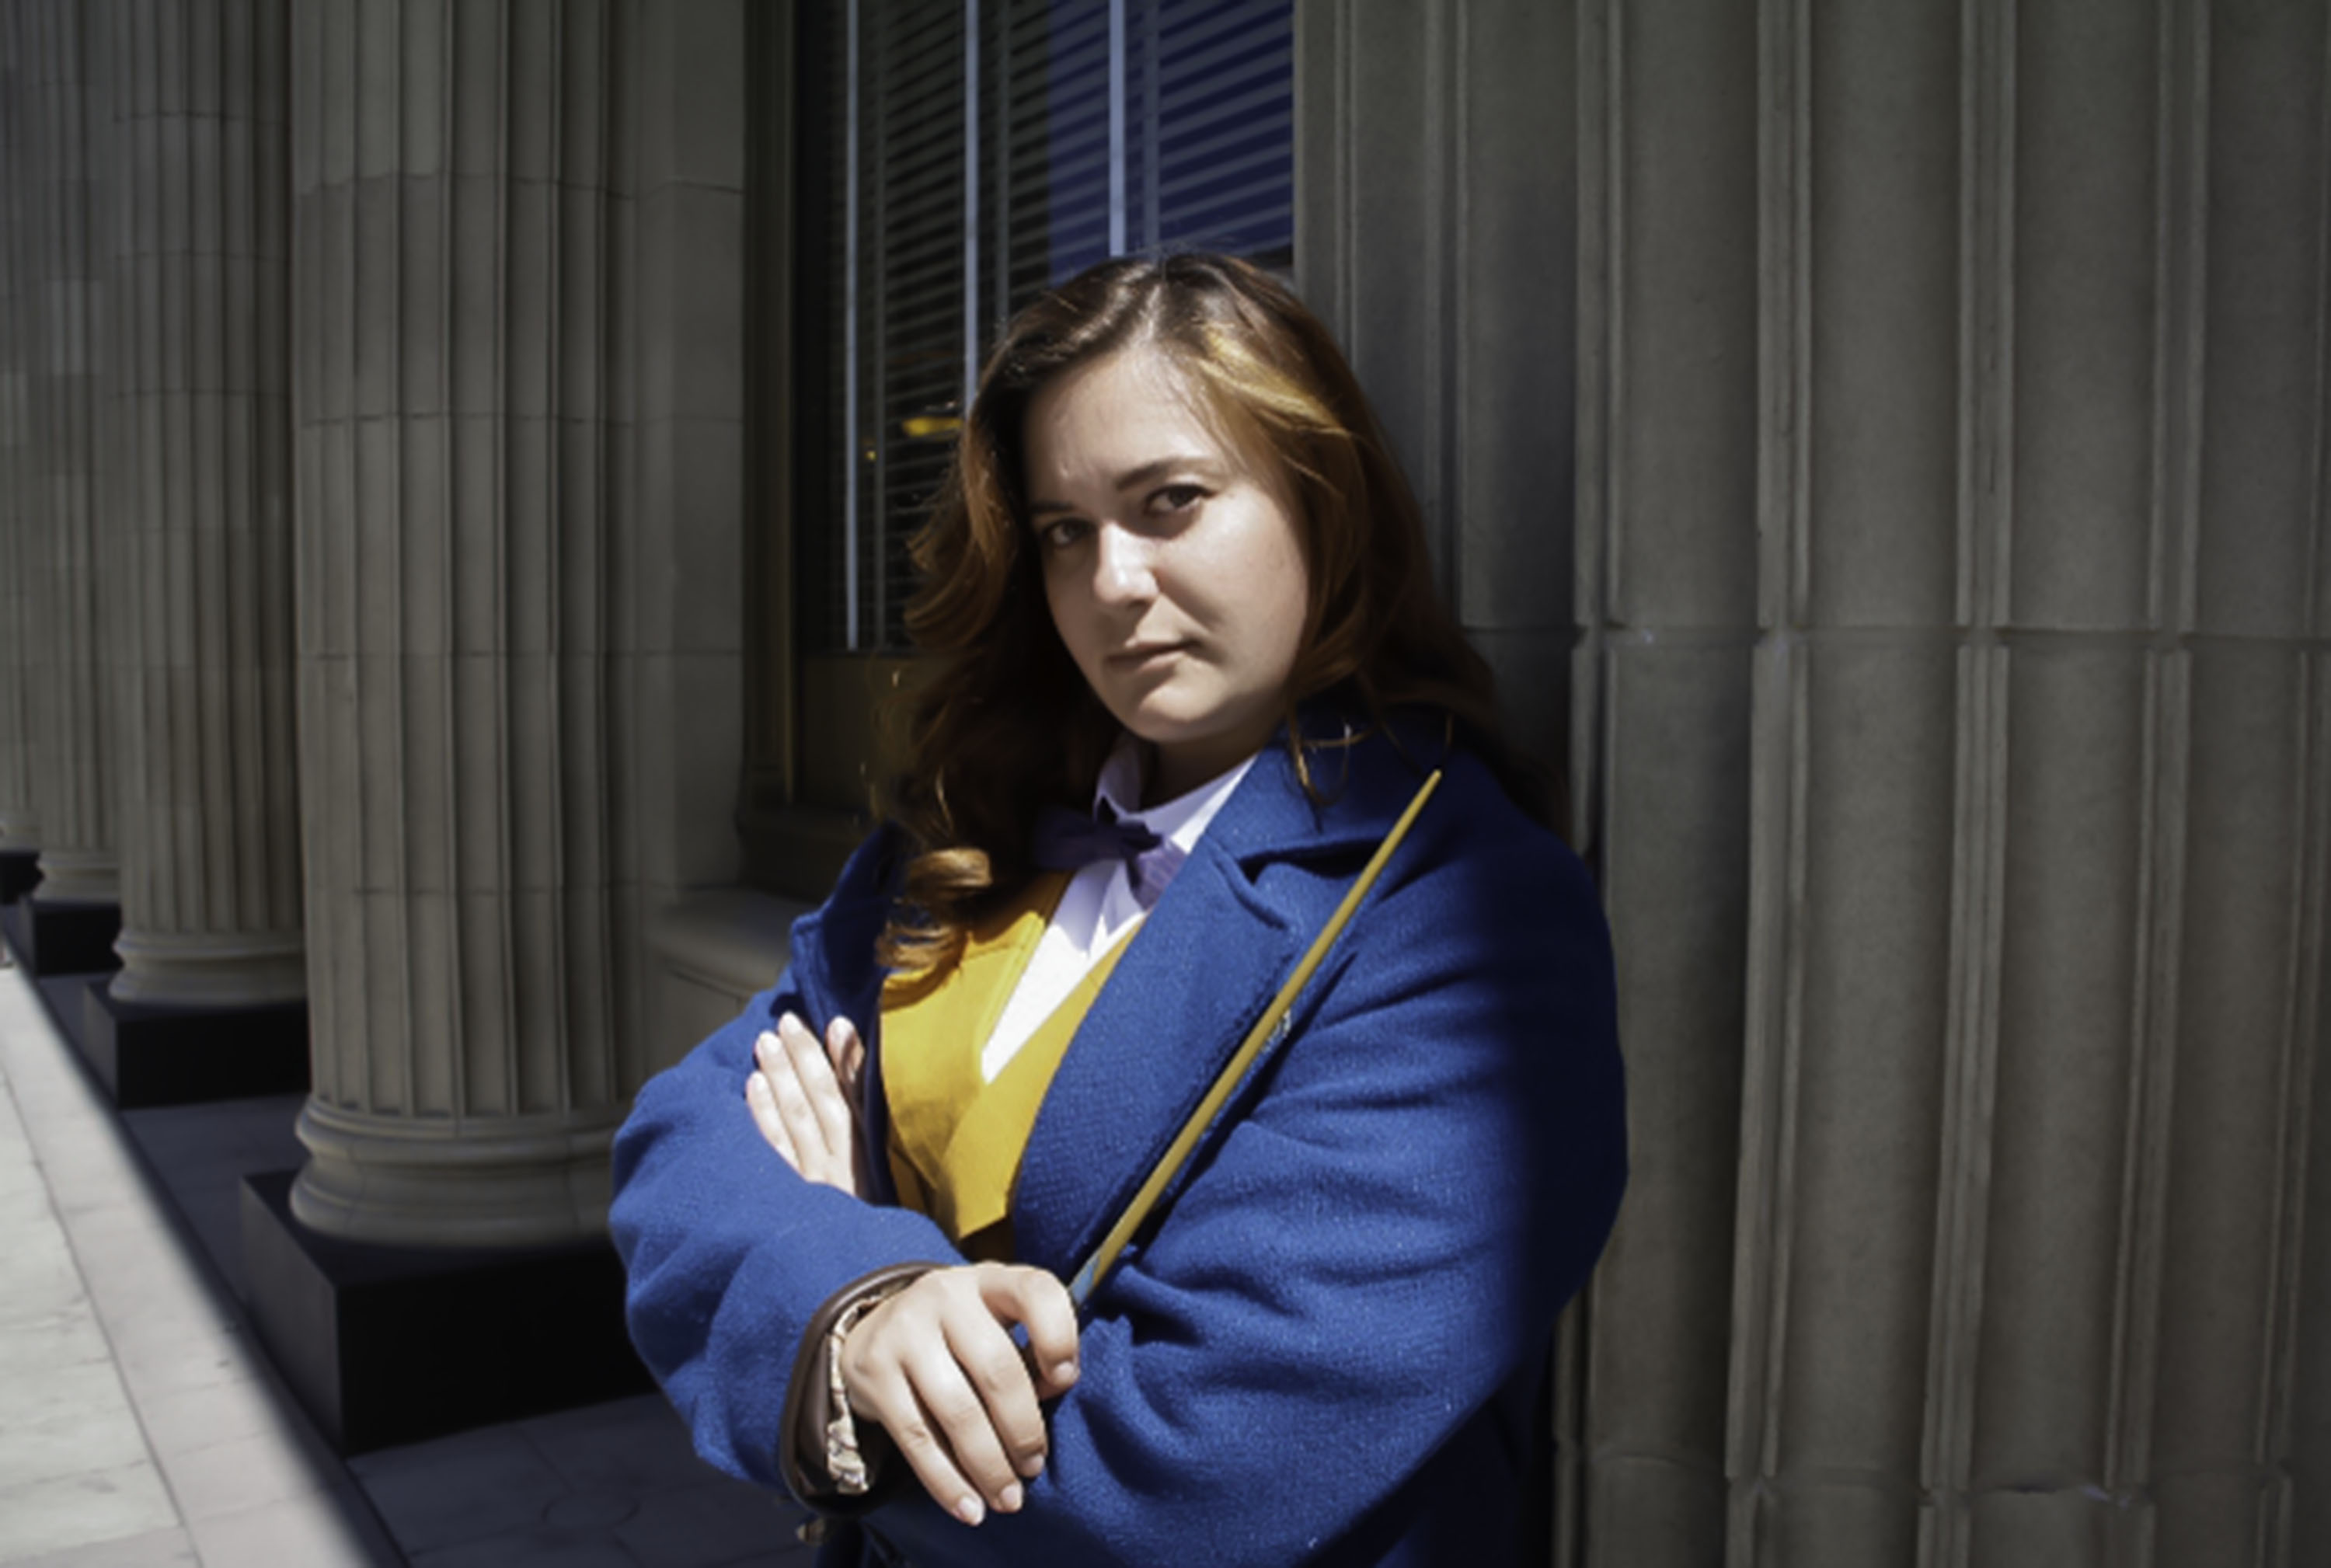 Temple of Geek Featured Cosplay – Kylie Marcil